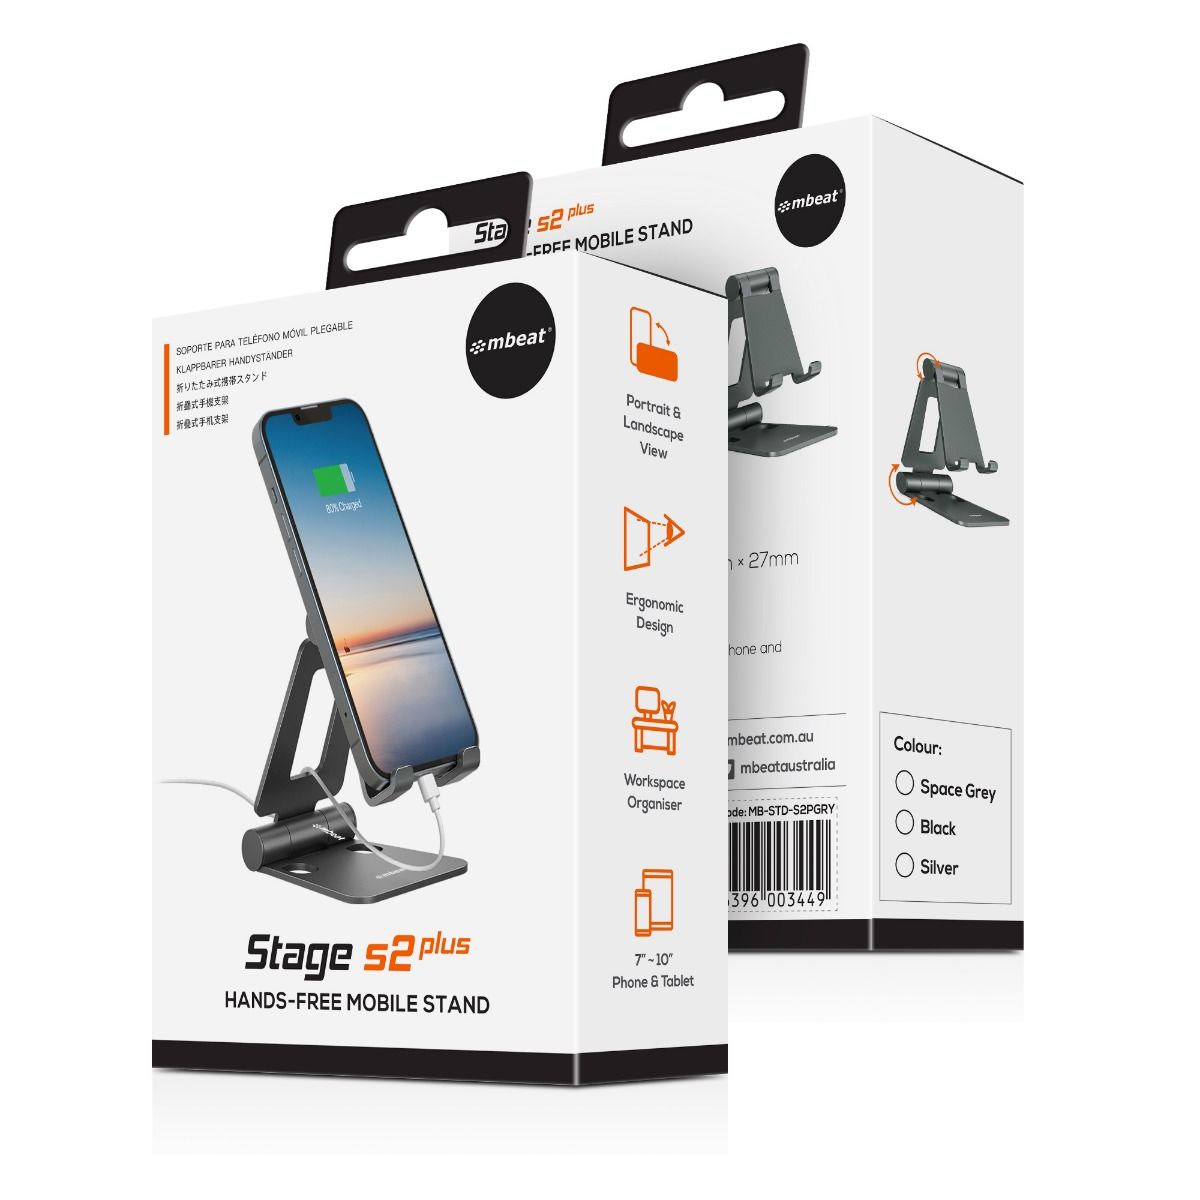 mbeat Stage S2+ Hands-Free Mobile Stand